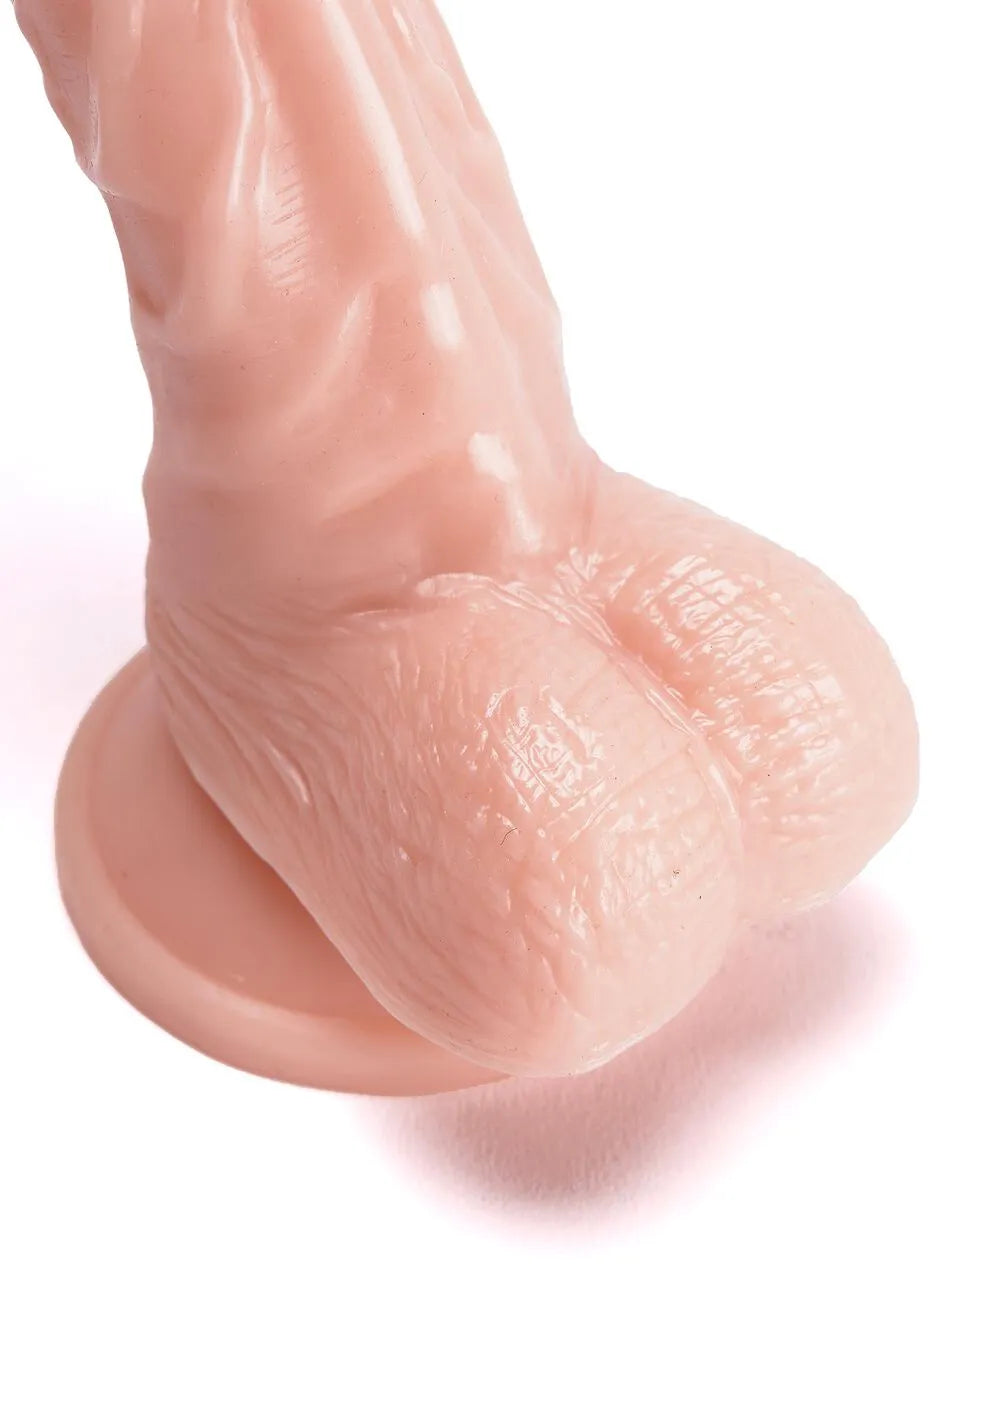 7" Realistic Curved Dildo